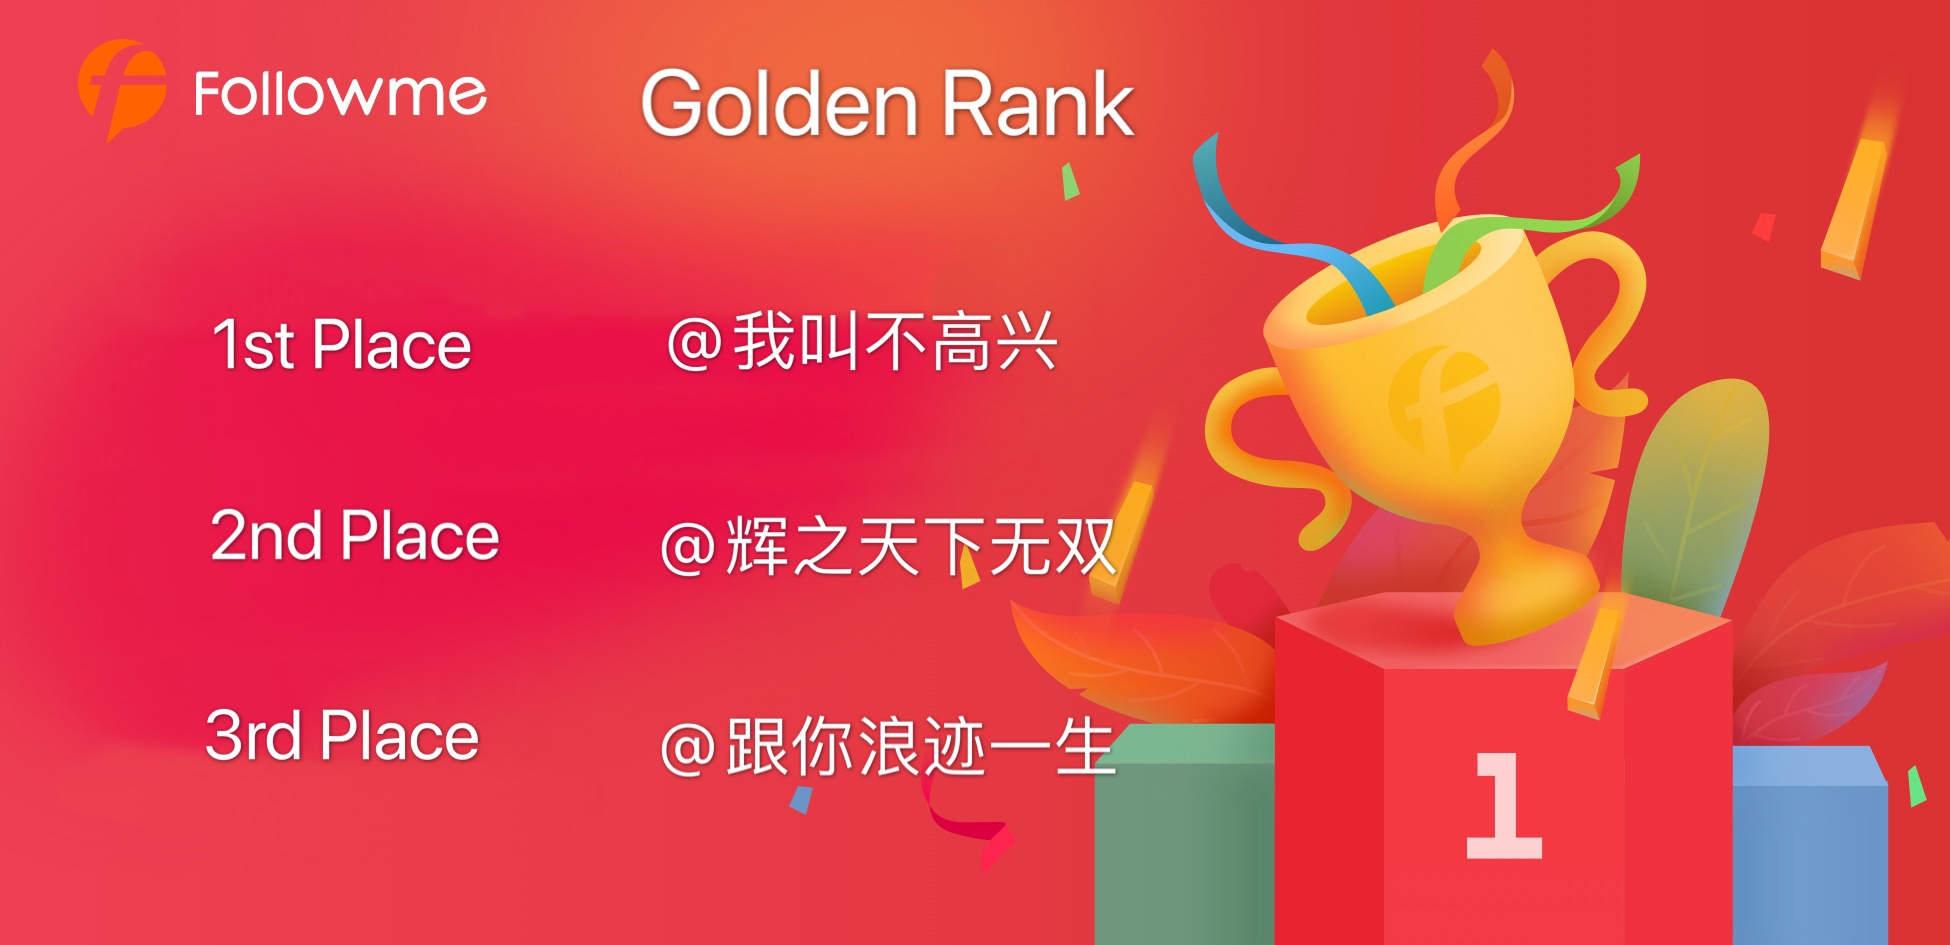 Result Announcement of Golden Rank—Congratulations to @我叫不开心 on winning $300!